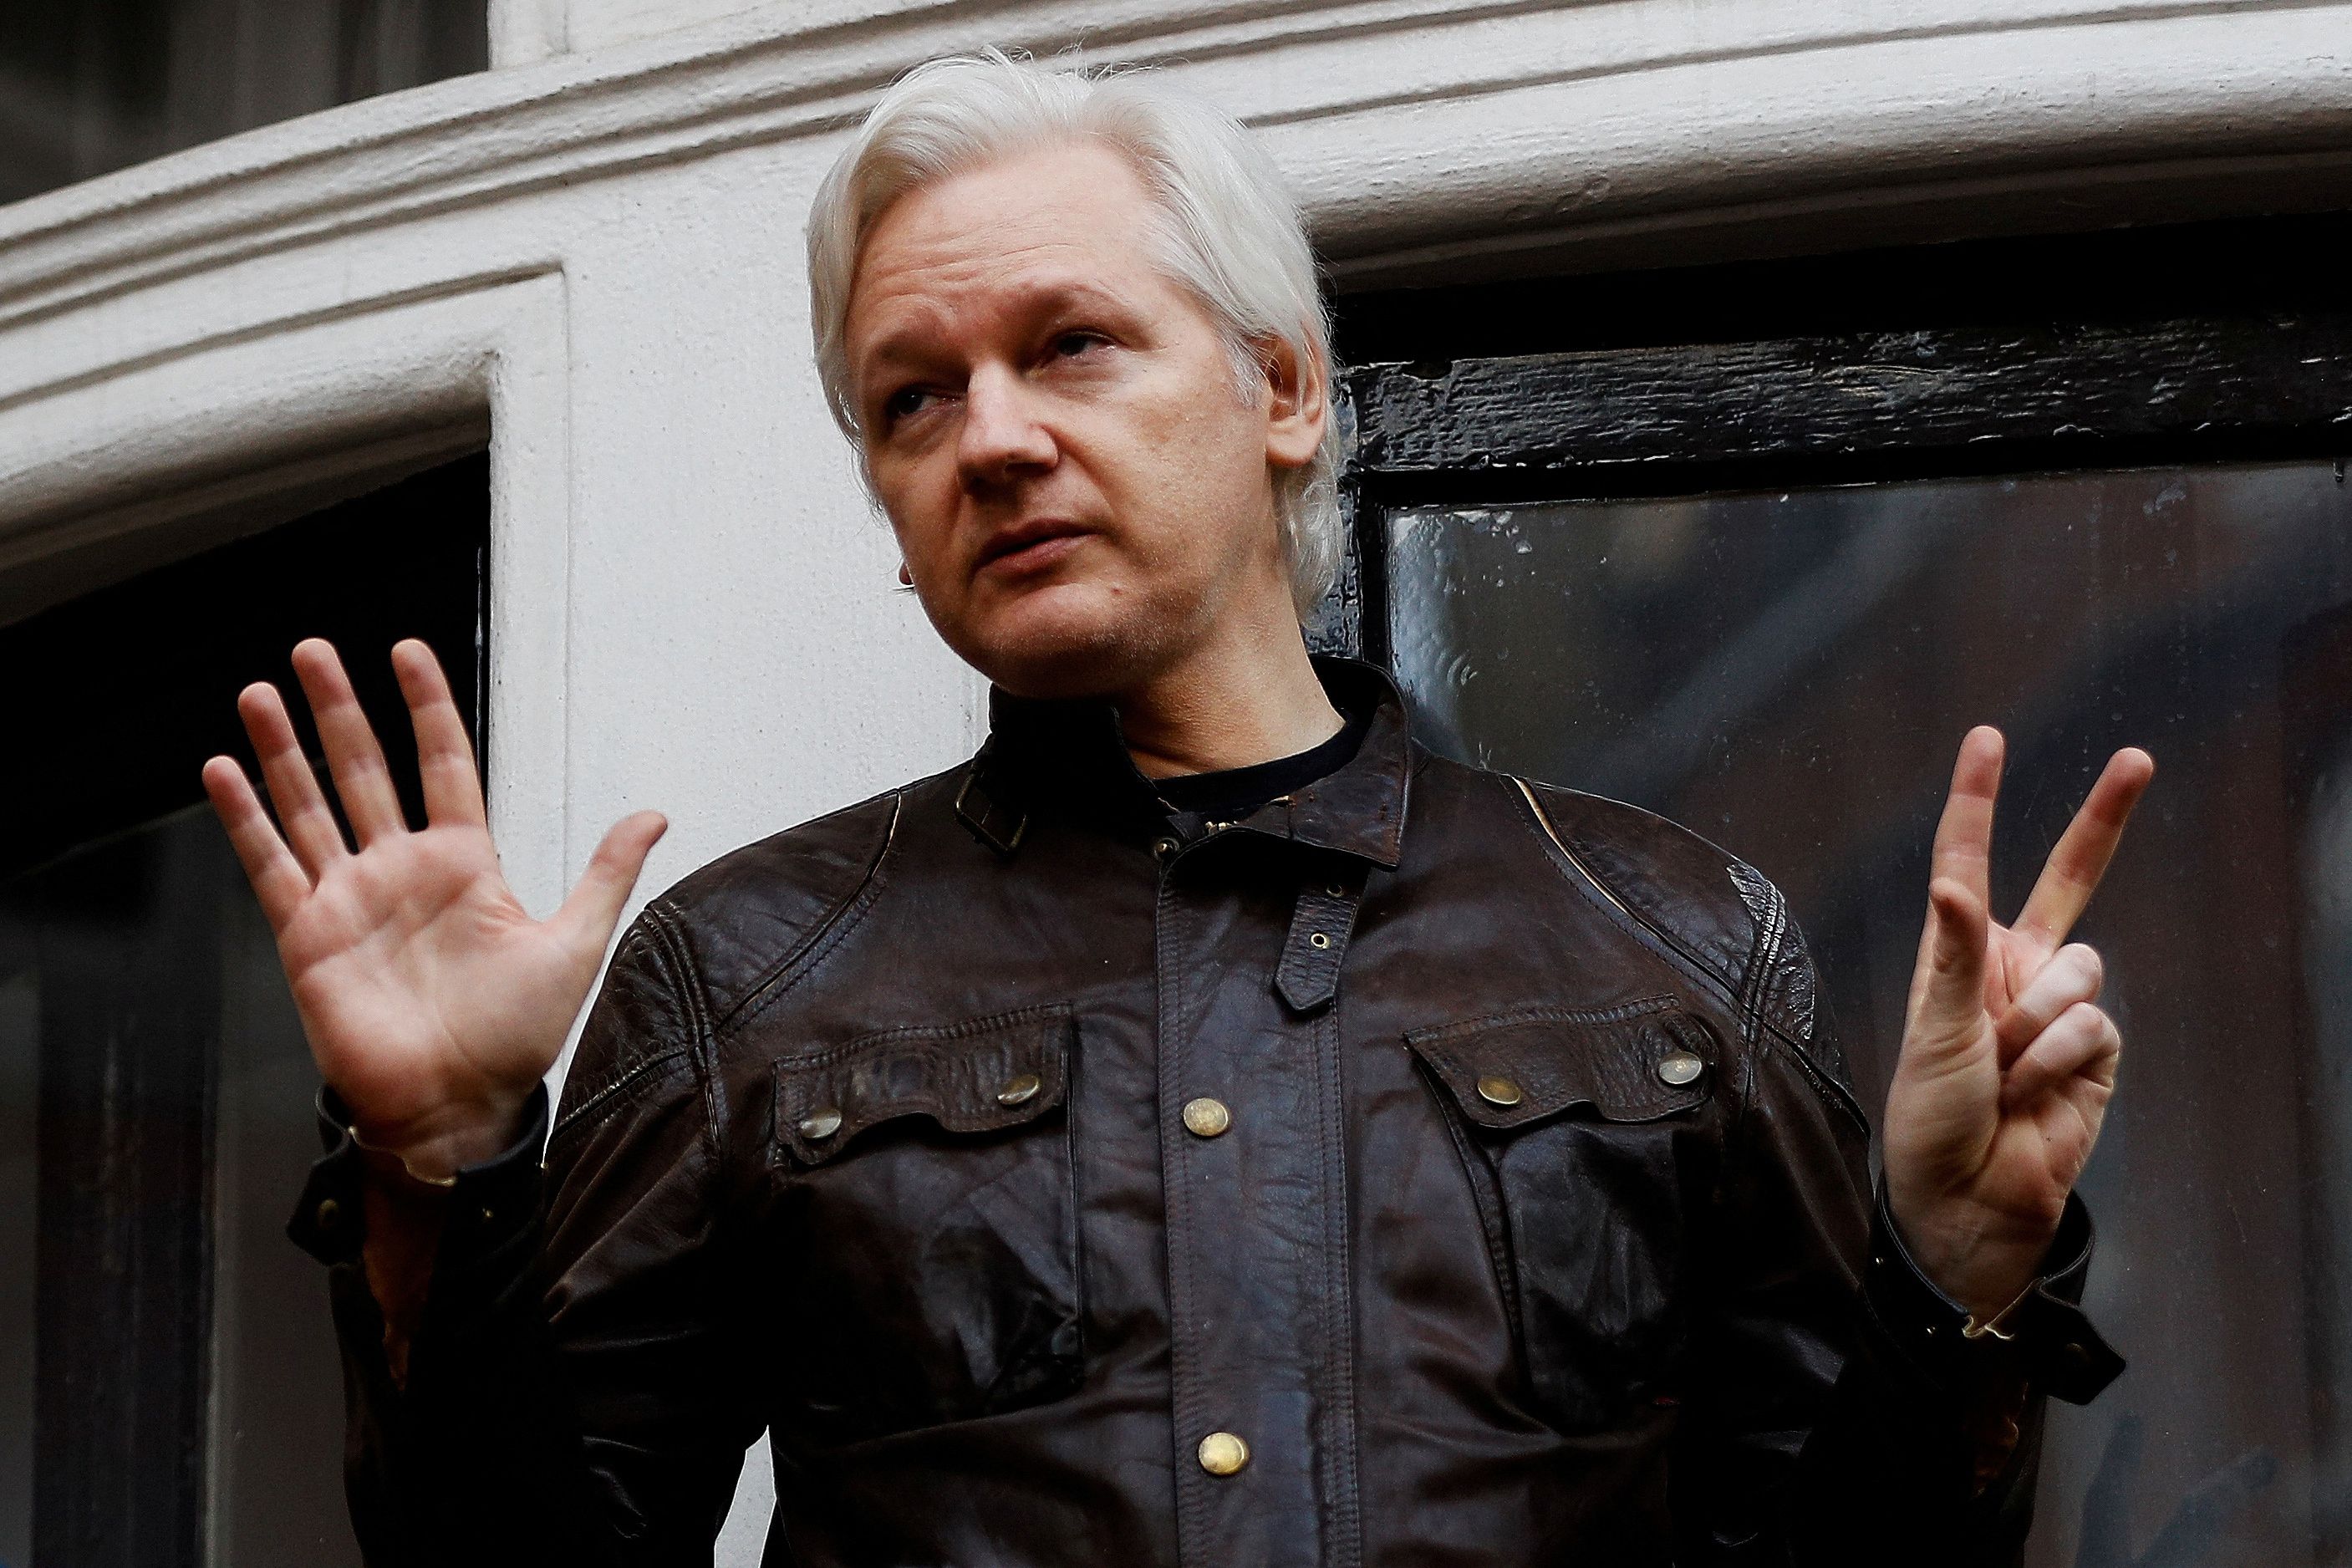 assange legal team sees 'no resolution' to us spying charges despite talk of plea deal